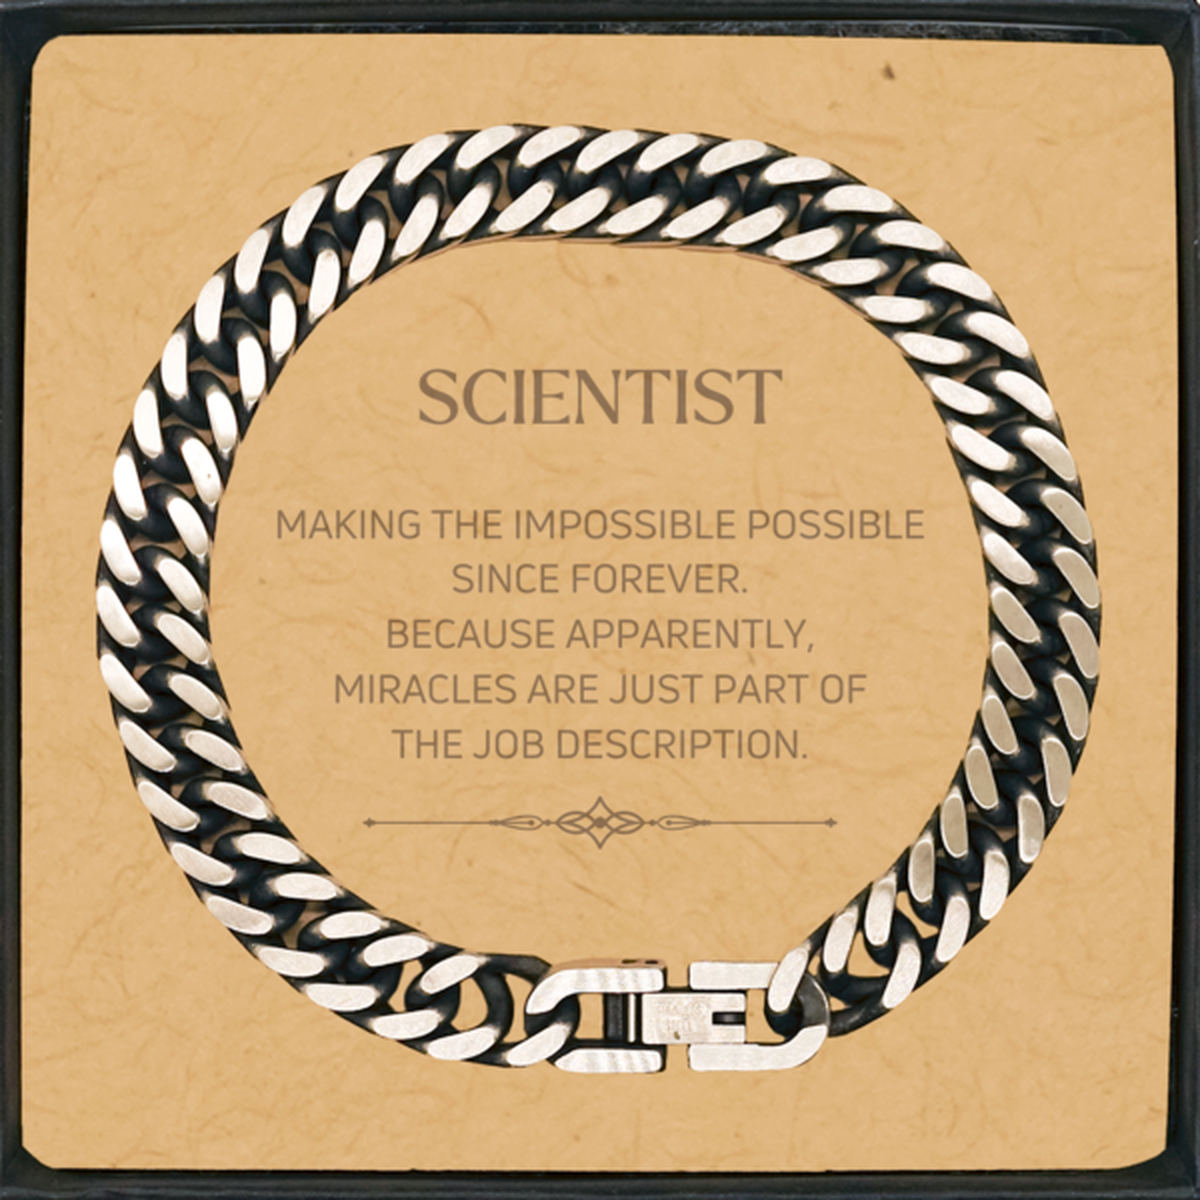 Funny Scientist Gifts, Miracles are just part of the job description, Inspirational Birthday Cuban Link Chain Bracelet For Scientist, Men, Women, Coworkers, Friends, Boss